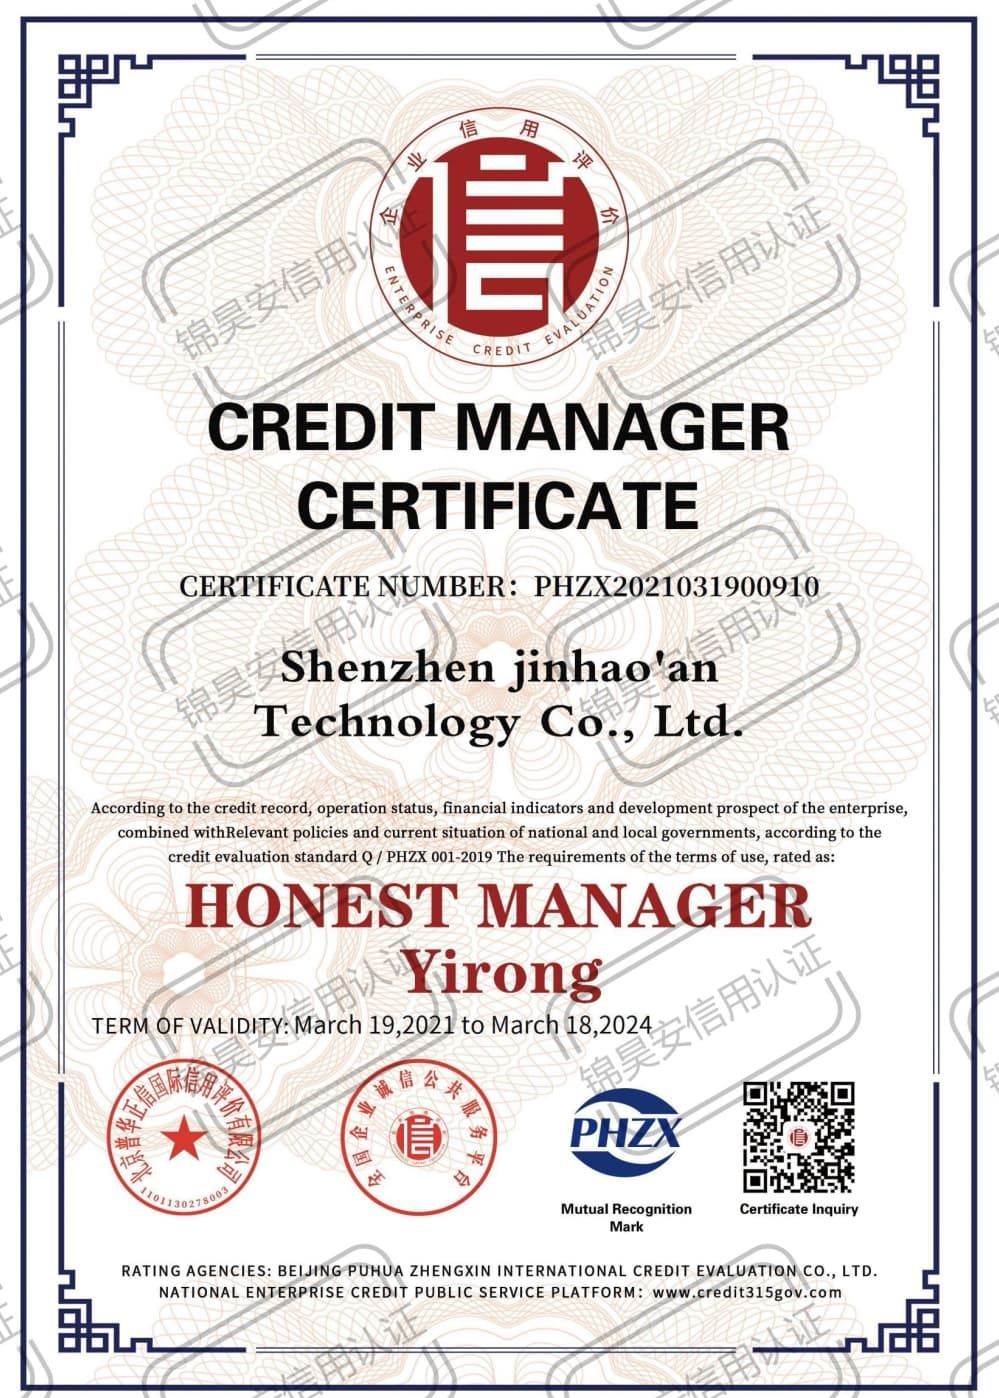 Credit Manager Certificate